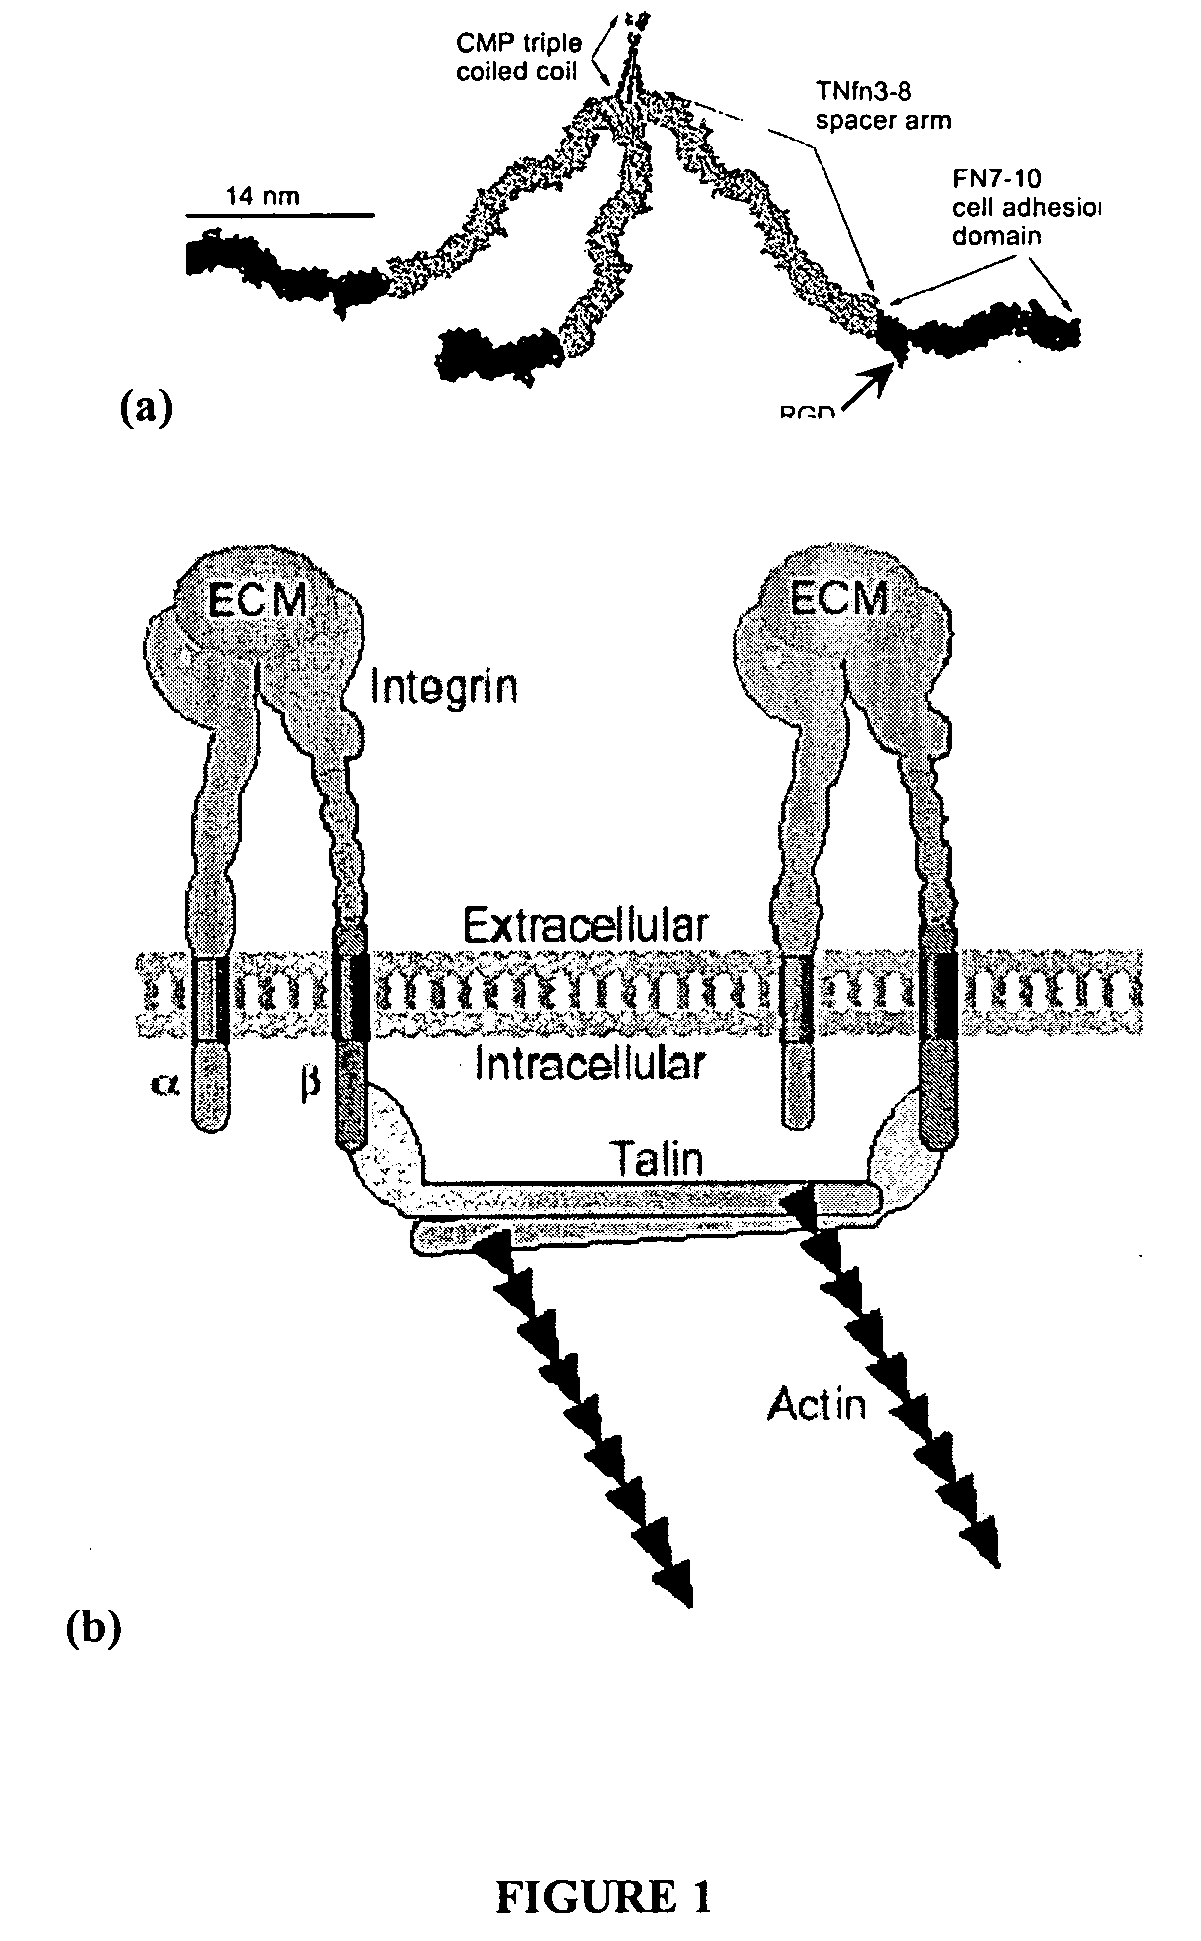 Device for measuring nanometer level pattern-dependent binding reactions